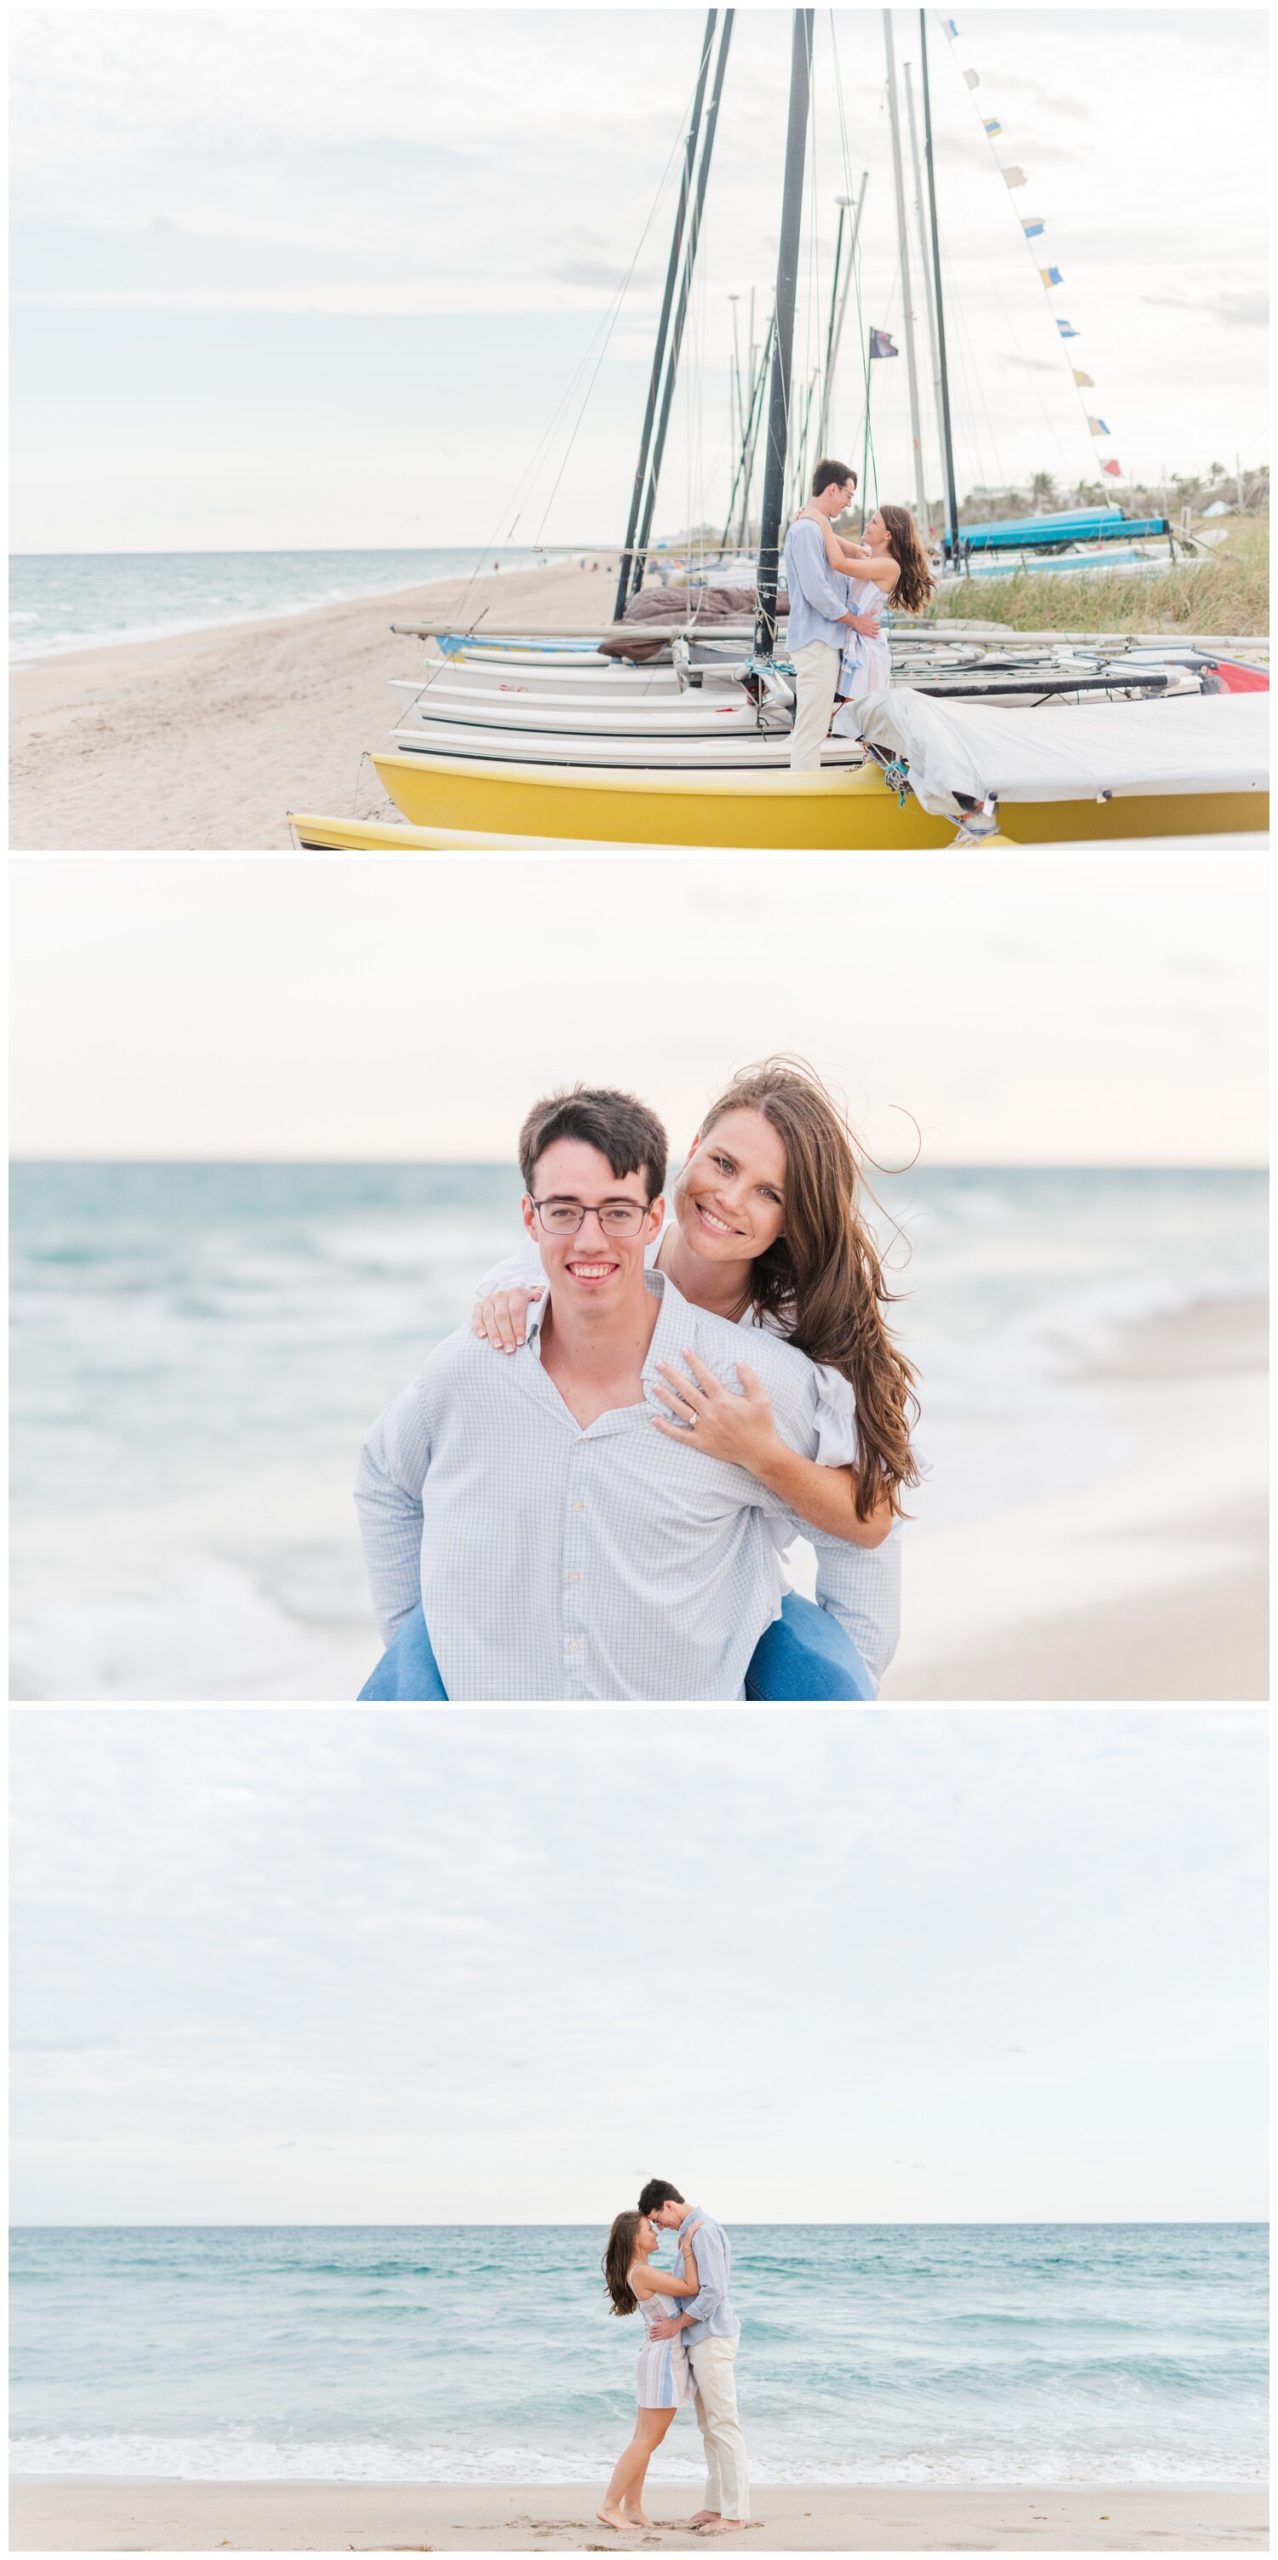 CMageePhotography_DelrayBeach_Engagement_2021_0002.jpg